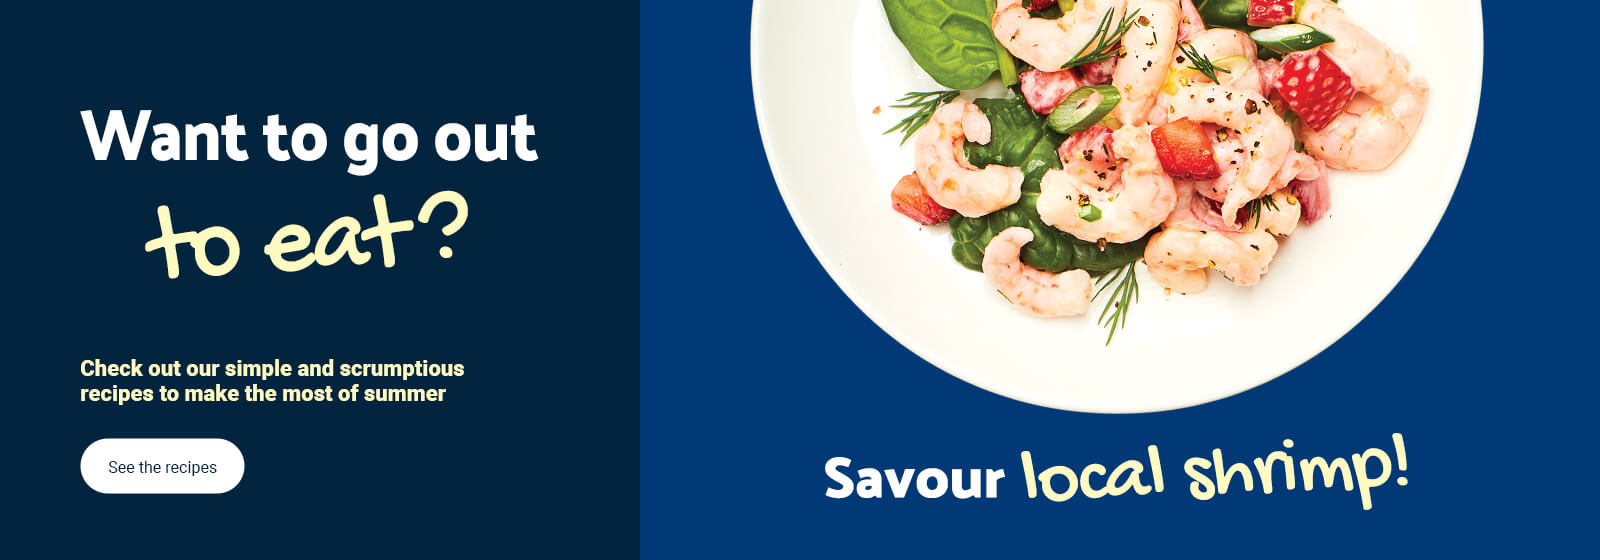 Text Reading ‘Want to go out to eat? Check out our simple and scrumptious recipes to make the most of summer. Savour local shrimp. ’See the recipes’ button given below.'